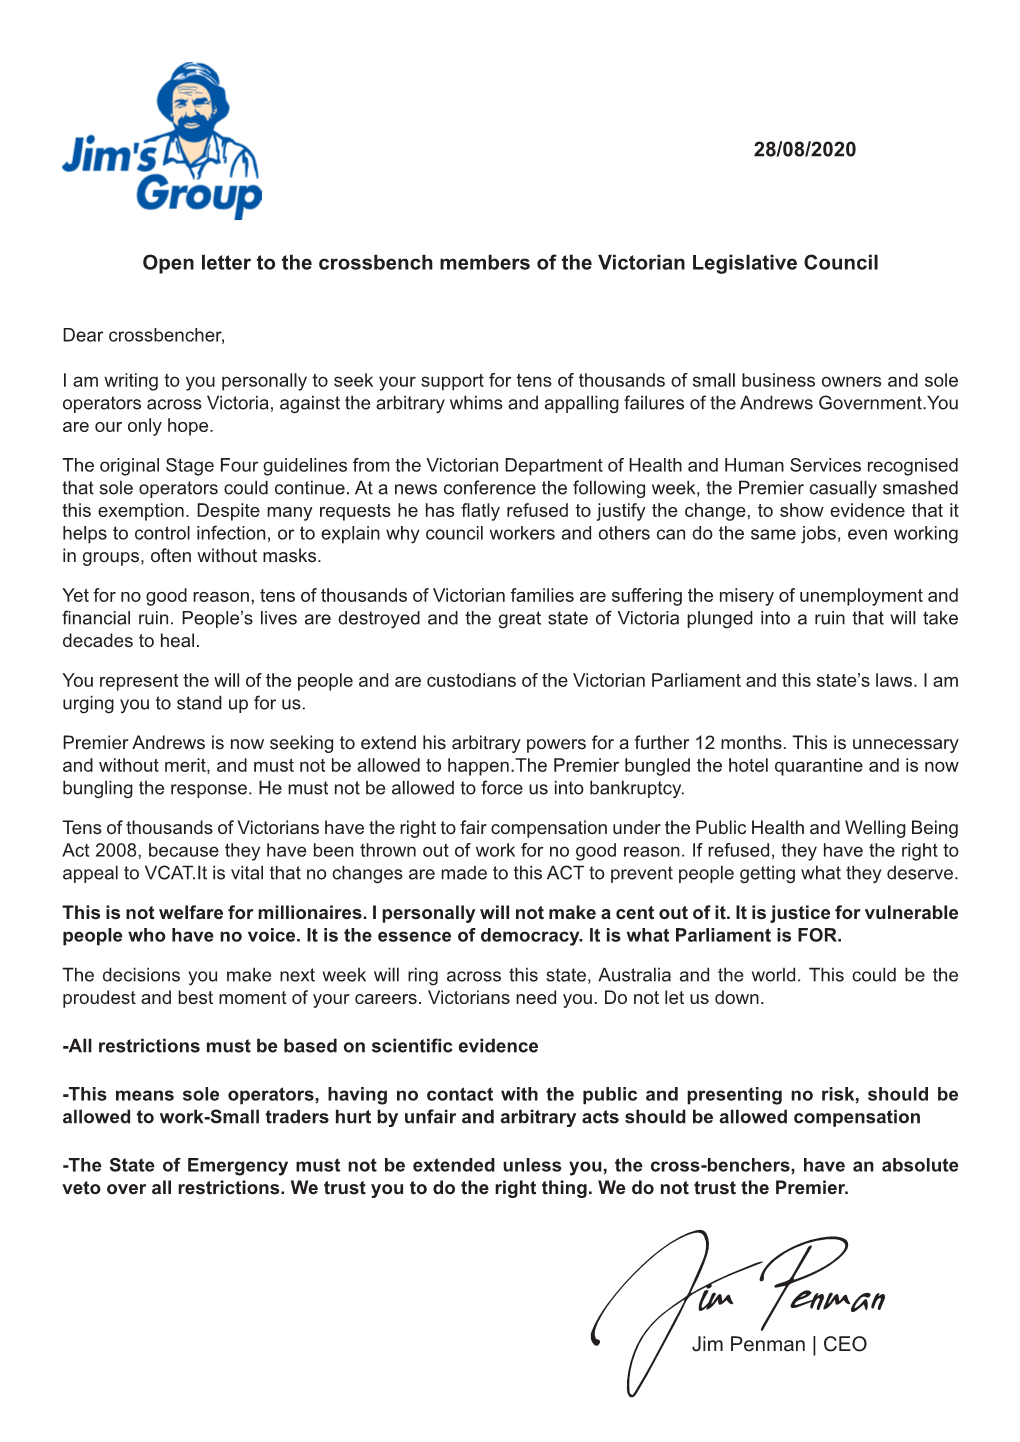 Download Jim Penman's Letter to the Crossbench